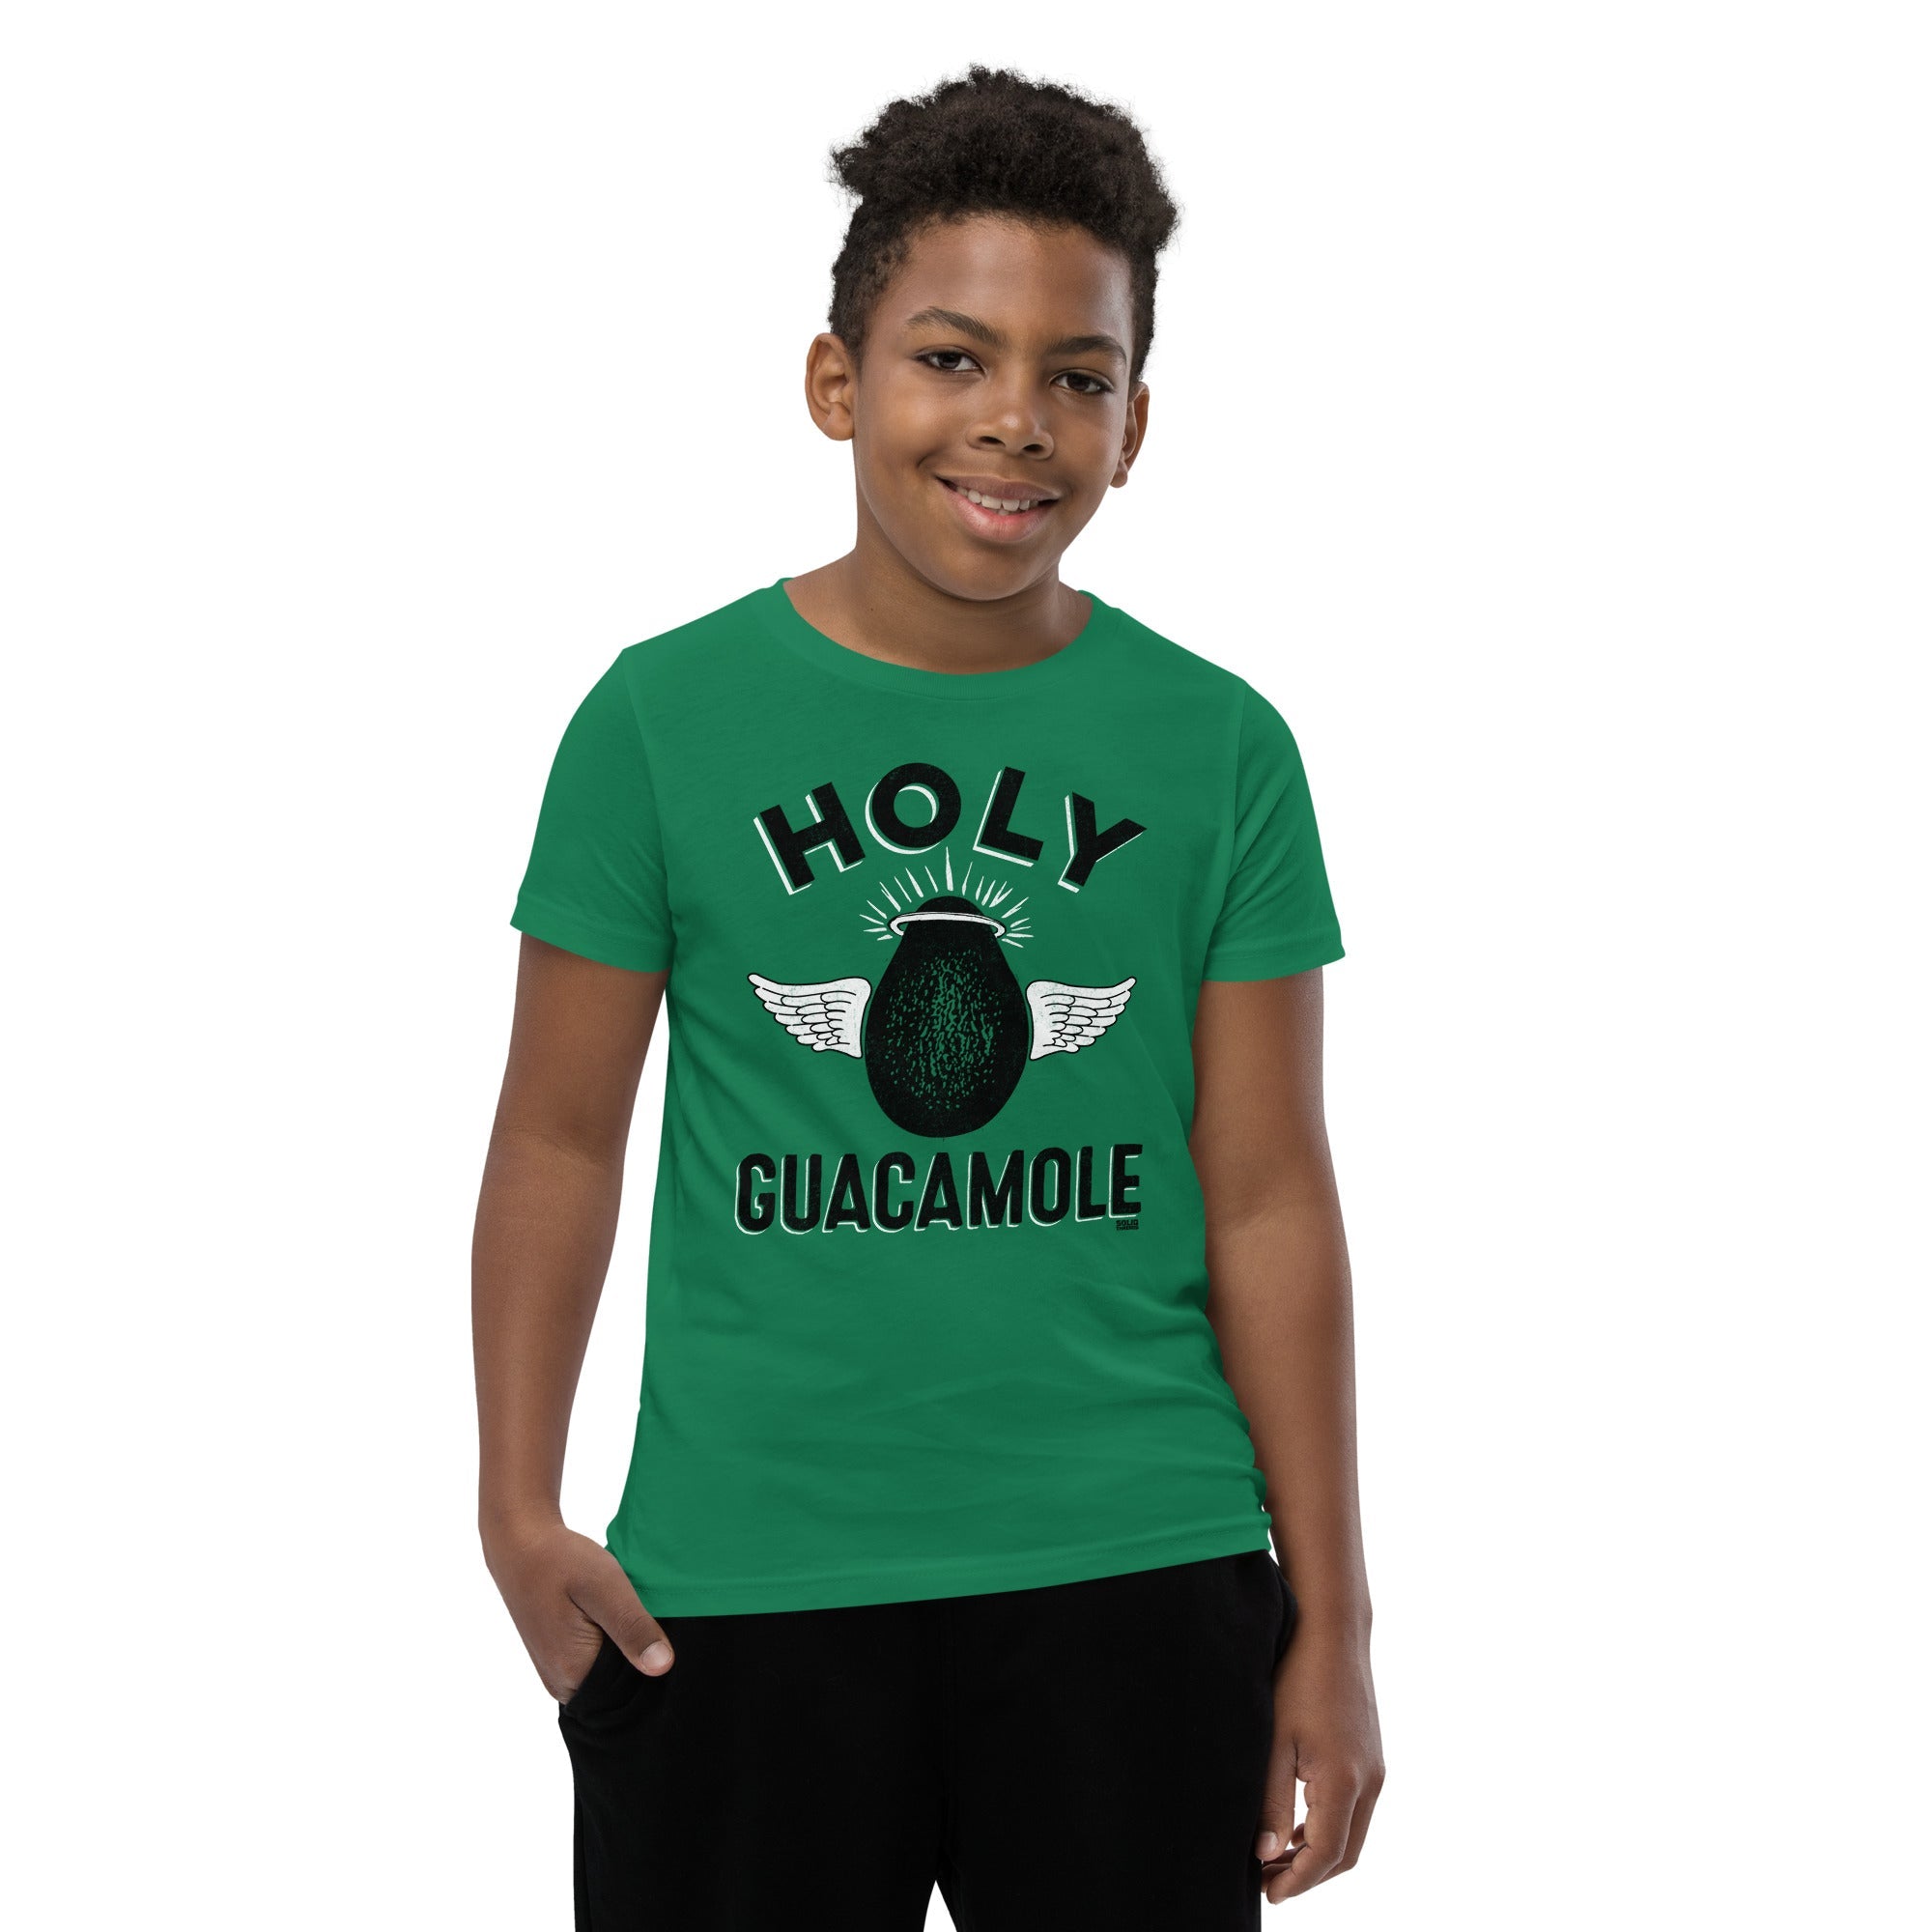 Youth Holy Guacamole Retro Foodie Extra Soft T-Shirt | Funny Avo Kids Tee | Solid Threads